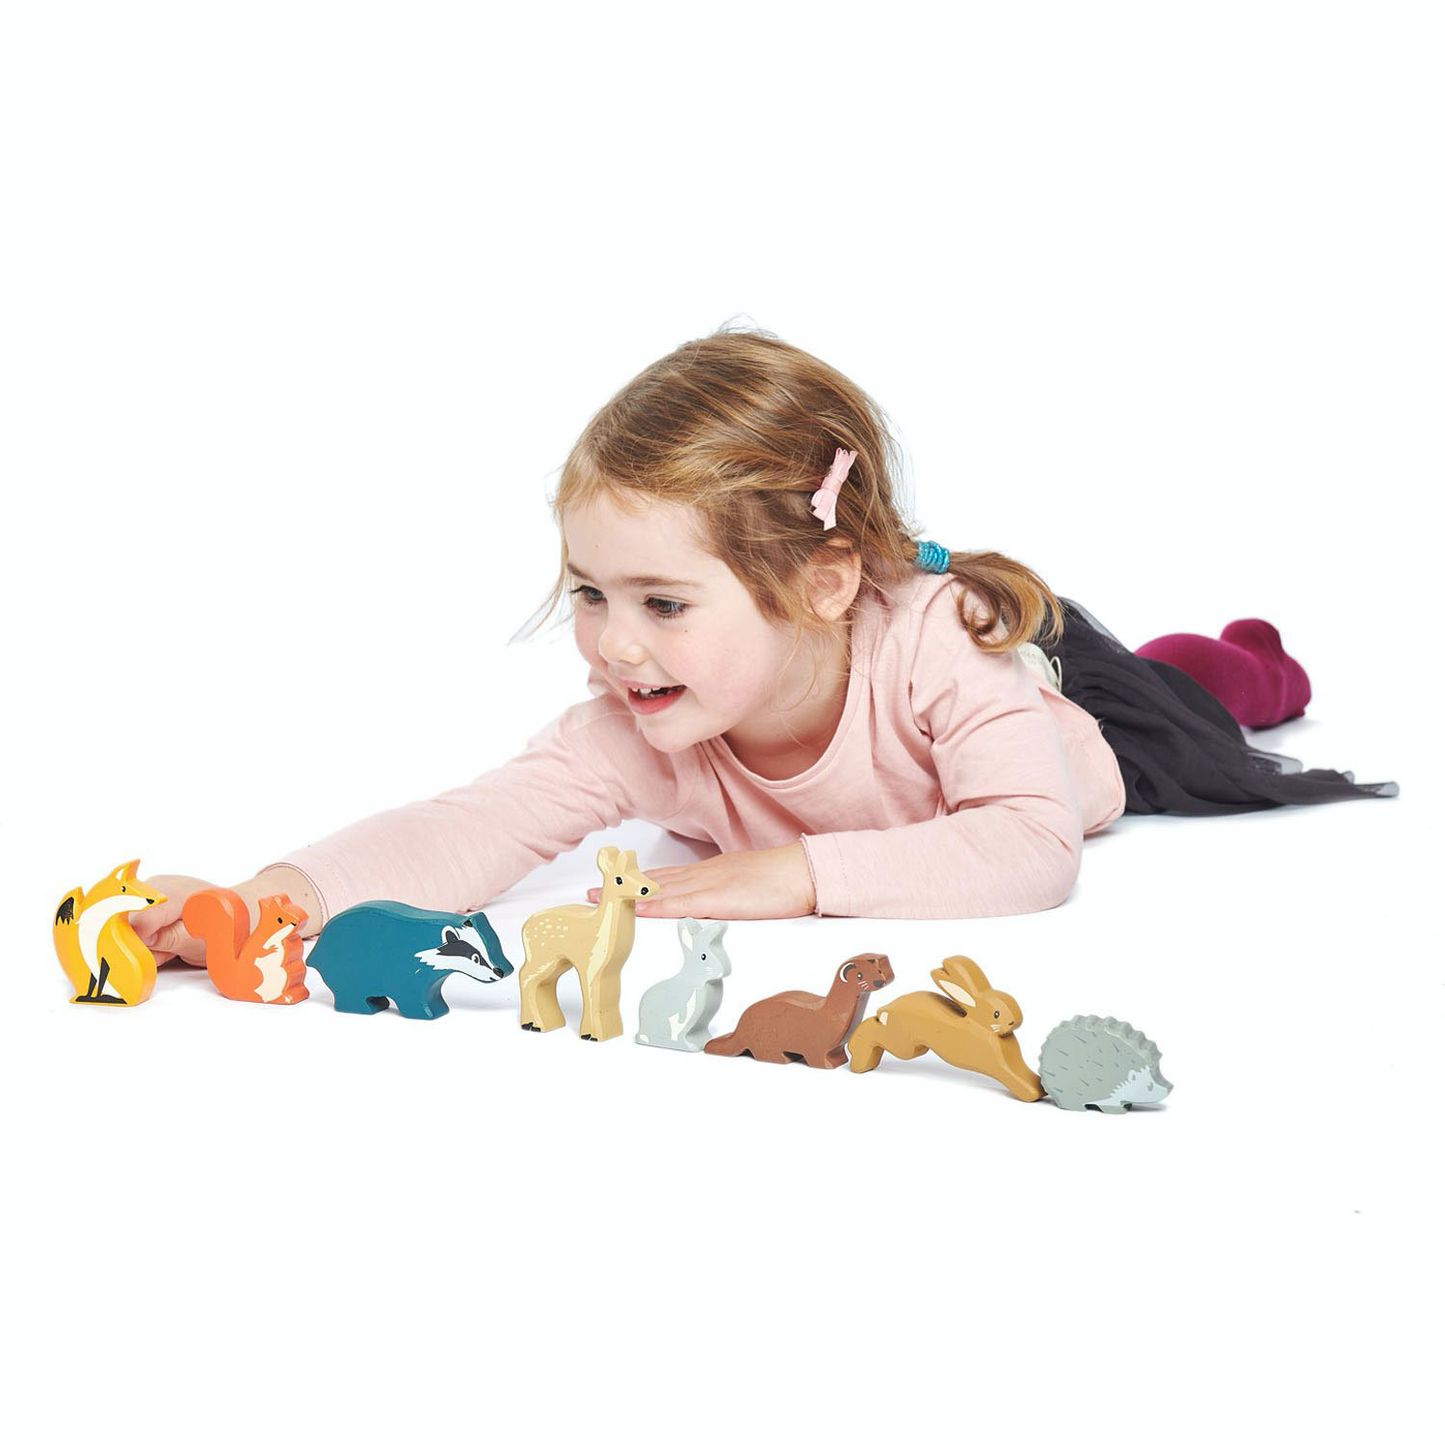 Tender Leaf 8 Woodland Animals & Shelf Set | Hand-Crafted Wooden Animal Toys | Girl Playing |BeoVERDE.ie